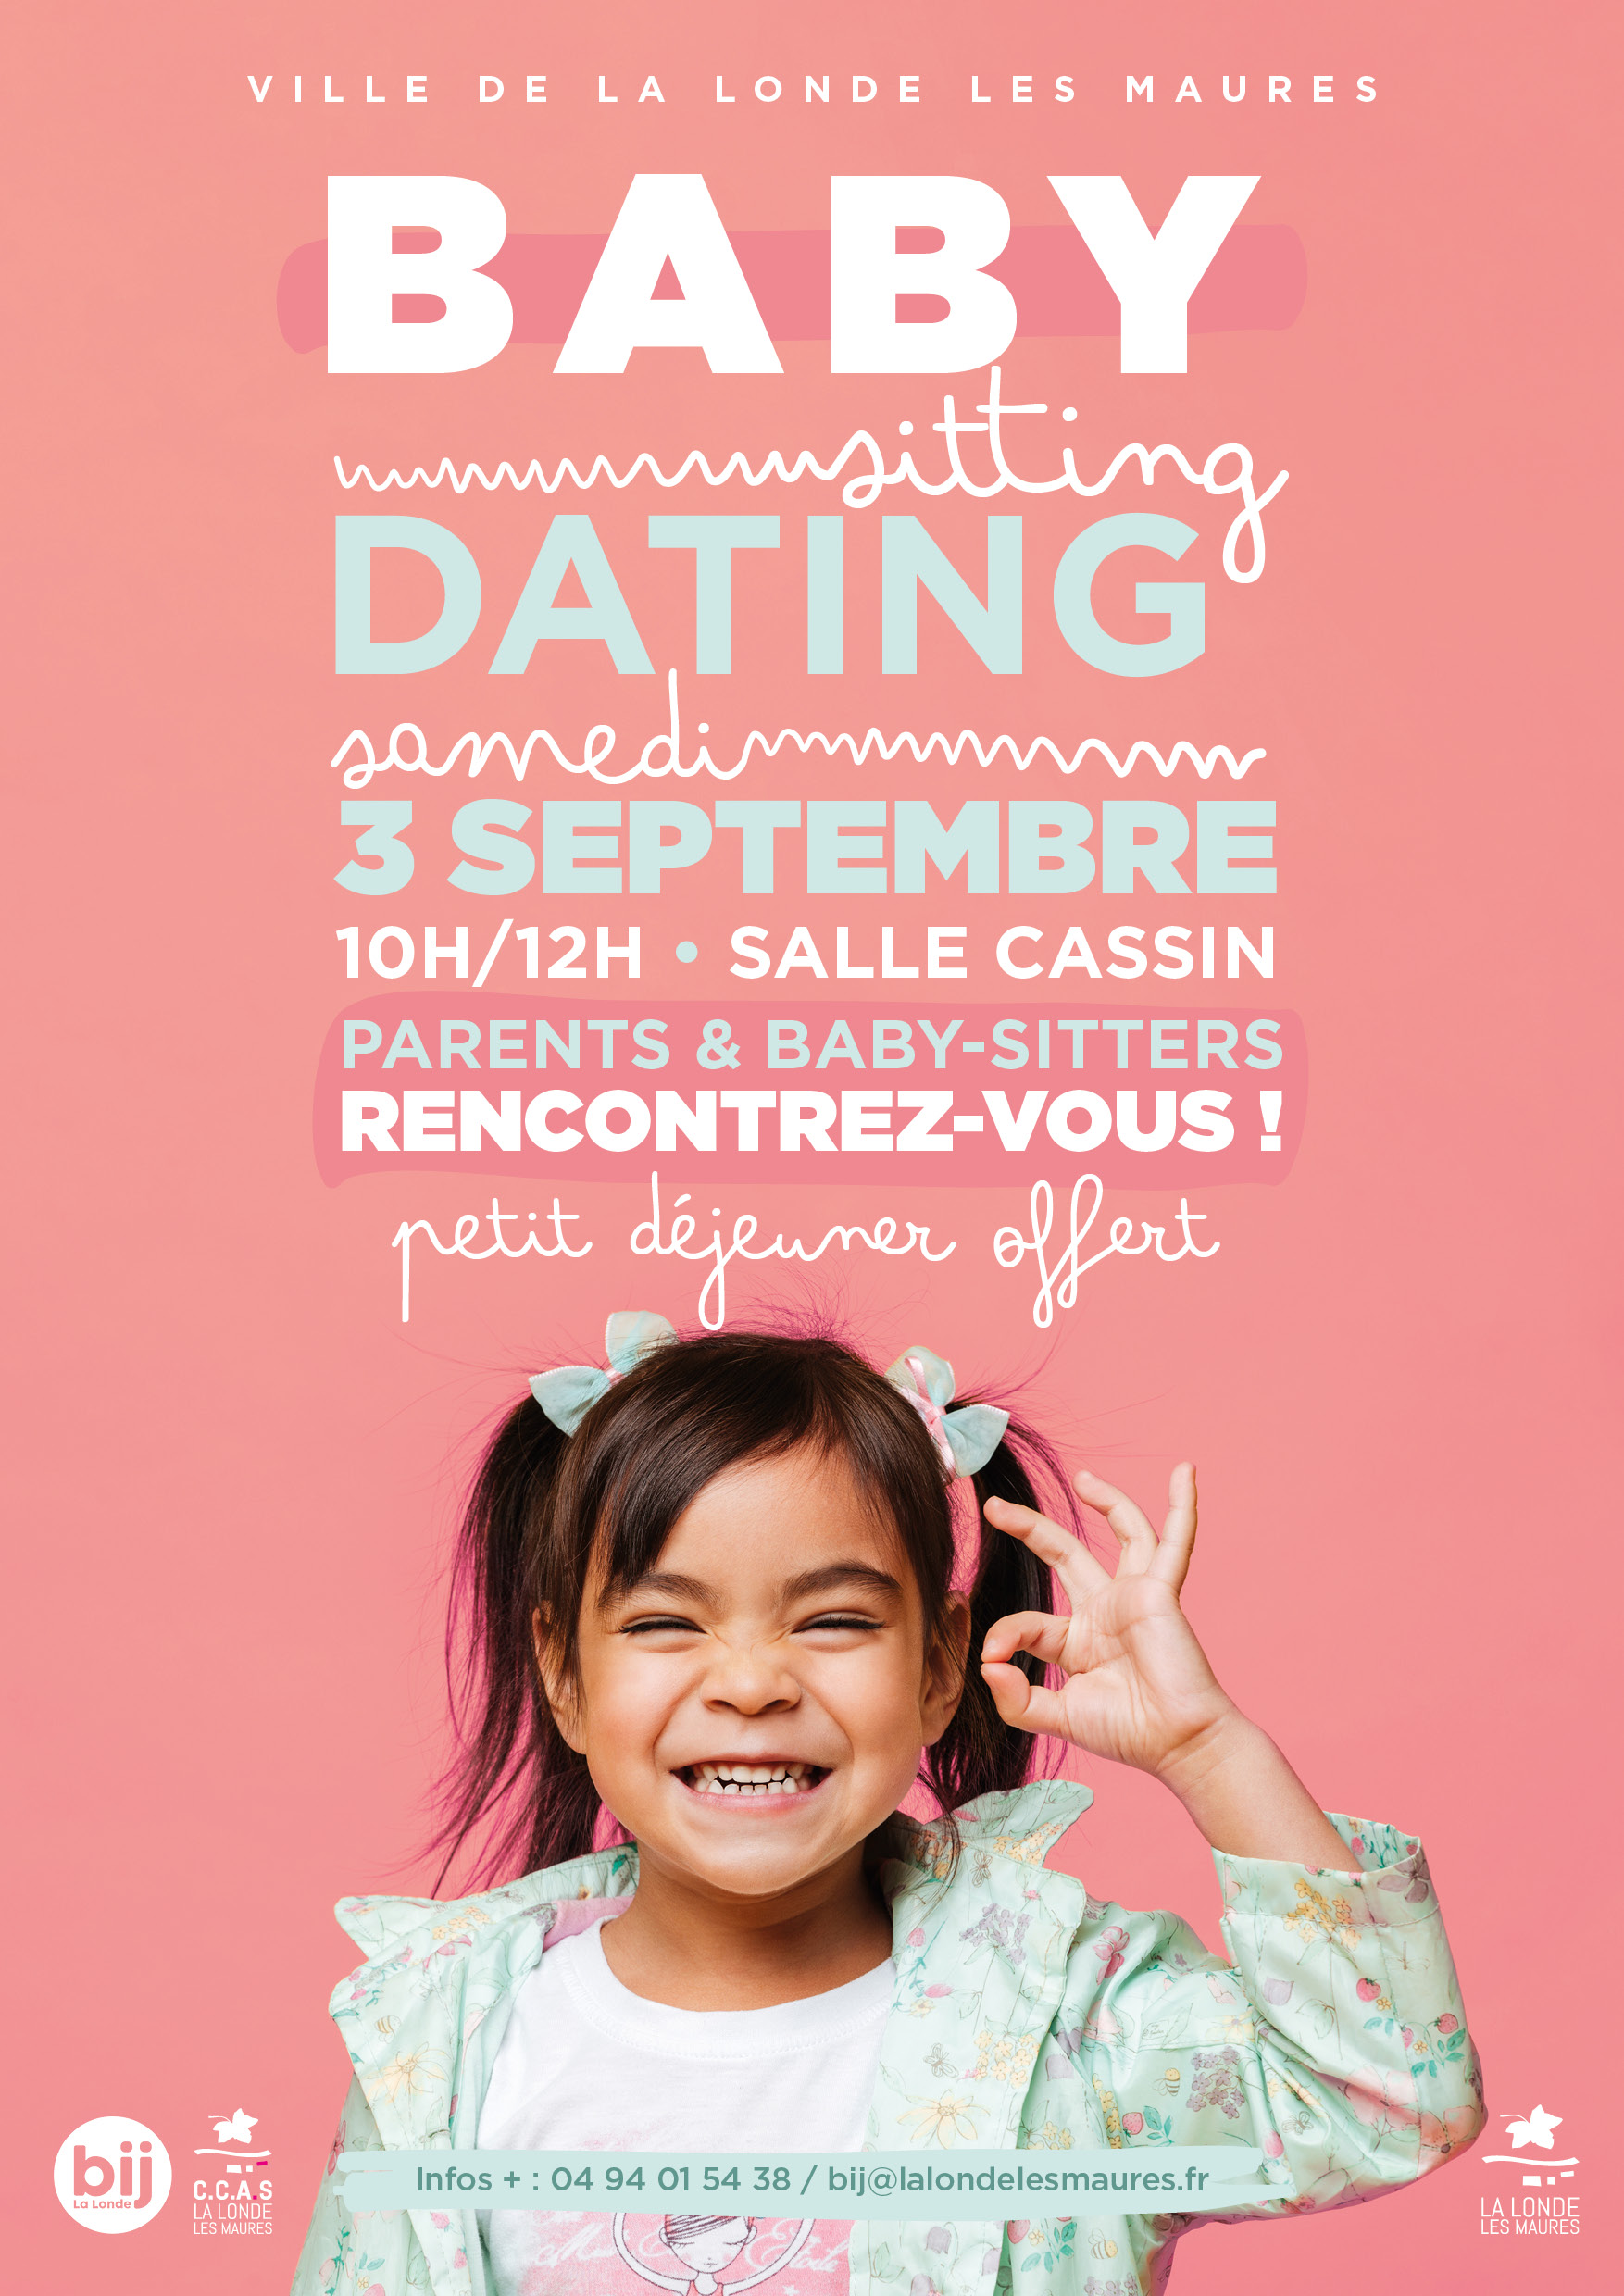 BABY SITTING DATING AFFICHE